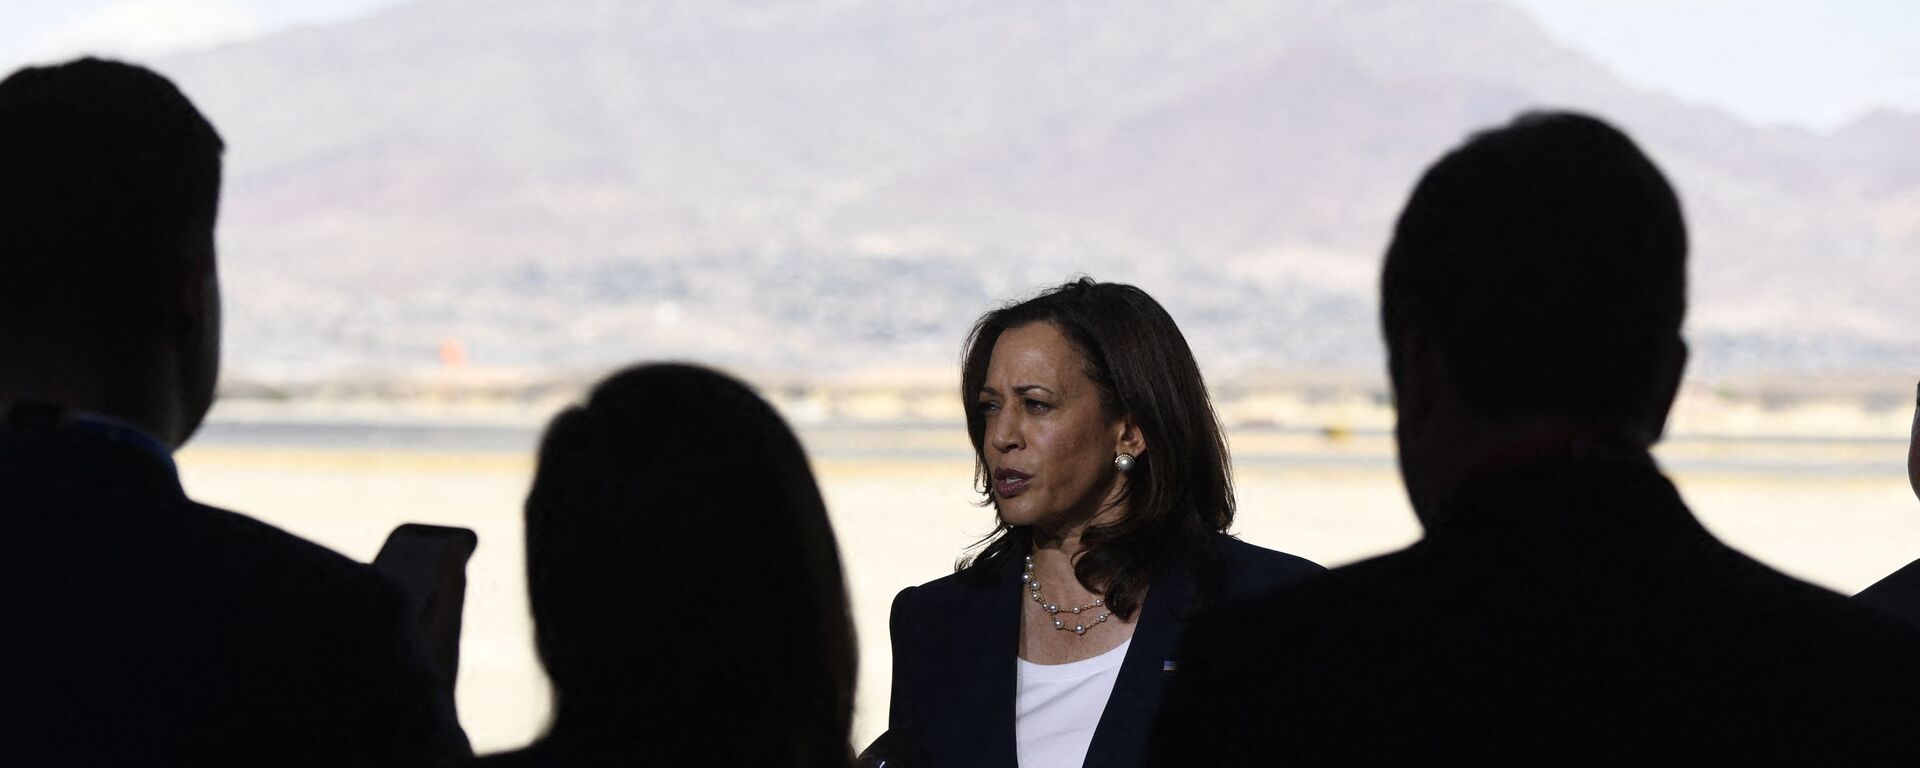 US Vice President Kamala Harris speaks during a press conference at El Paso International Airport, on June 25, 2021 in El Paso, Texas. - Vice President Kamala Harris on Friday, visited a Customs and Border Protection processing facility, and met with advocates and NGOs. - Sputnik International, 1920, 02.07.2021